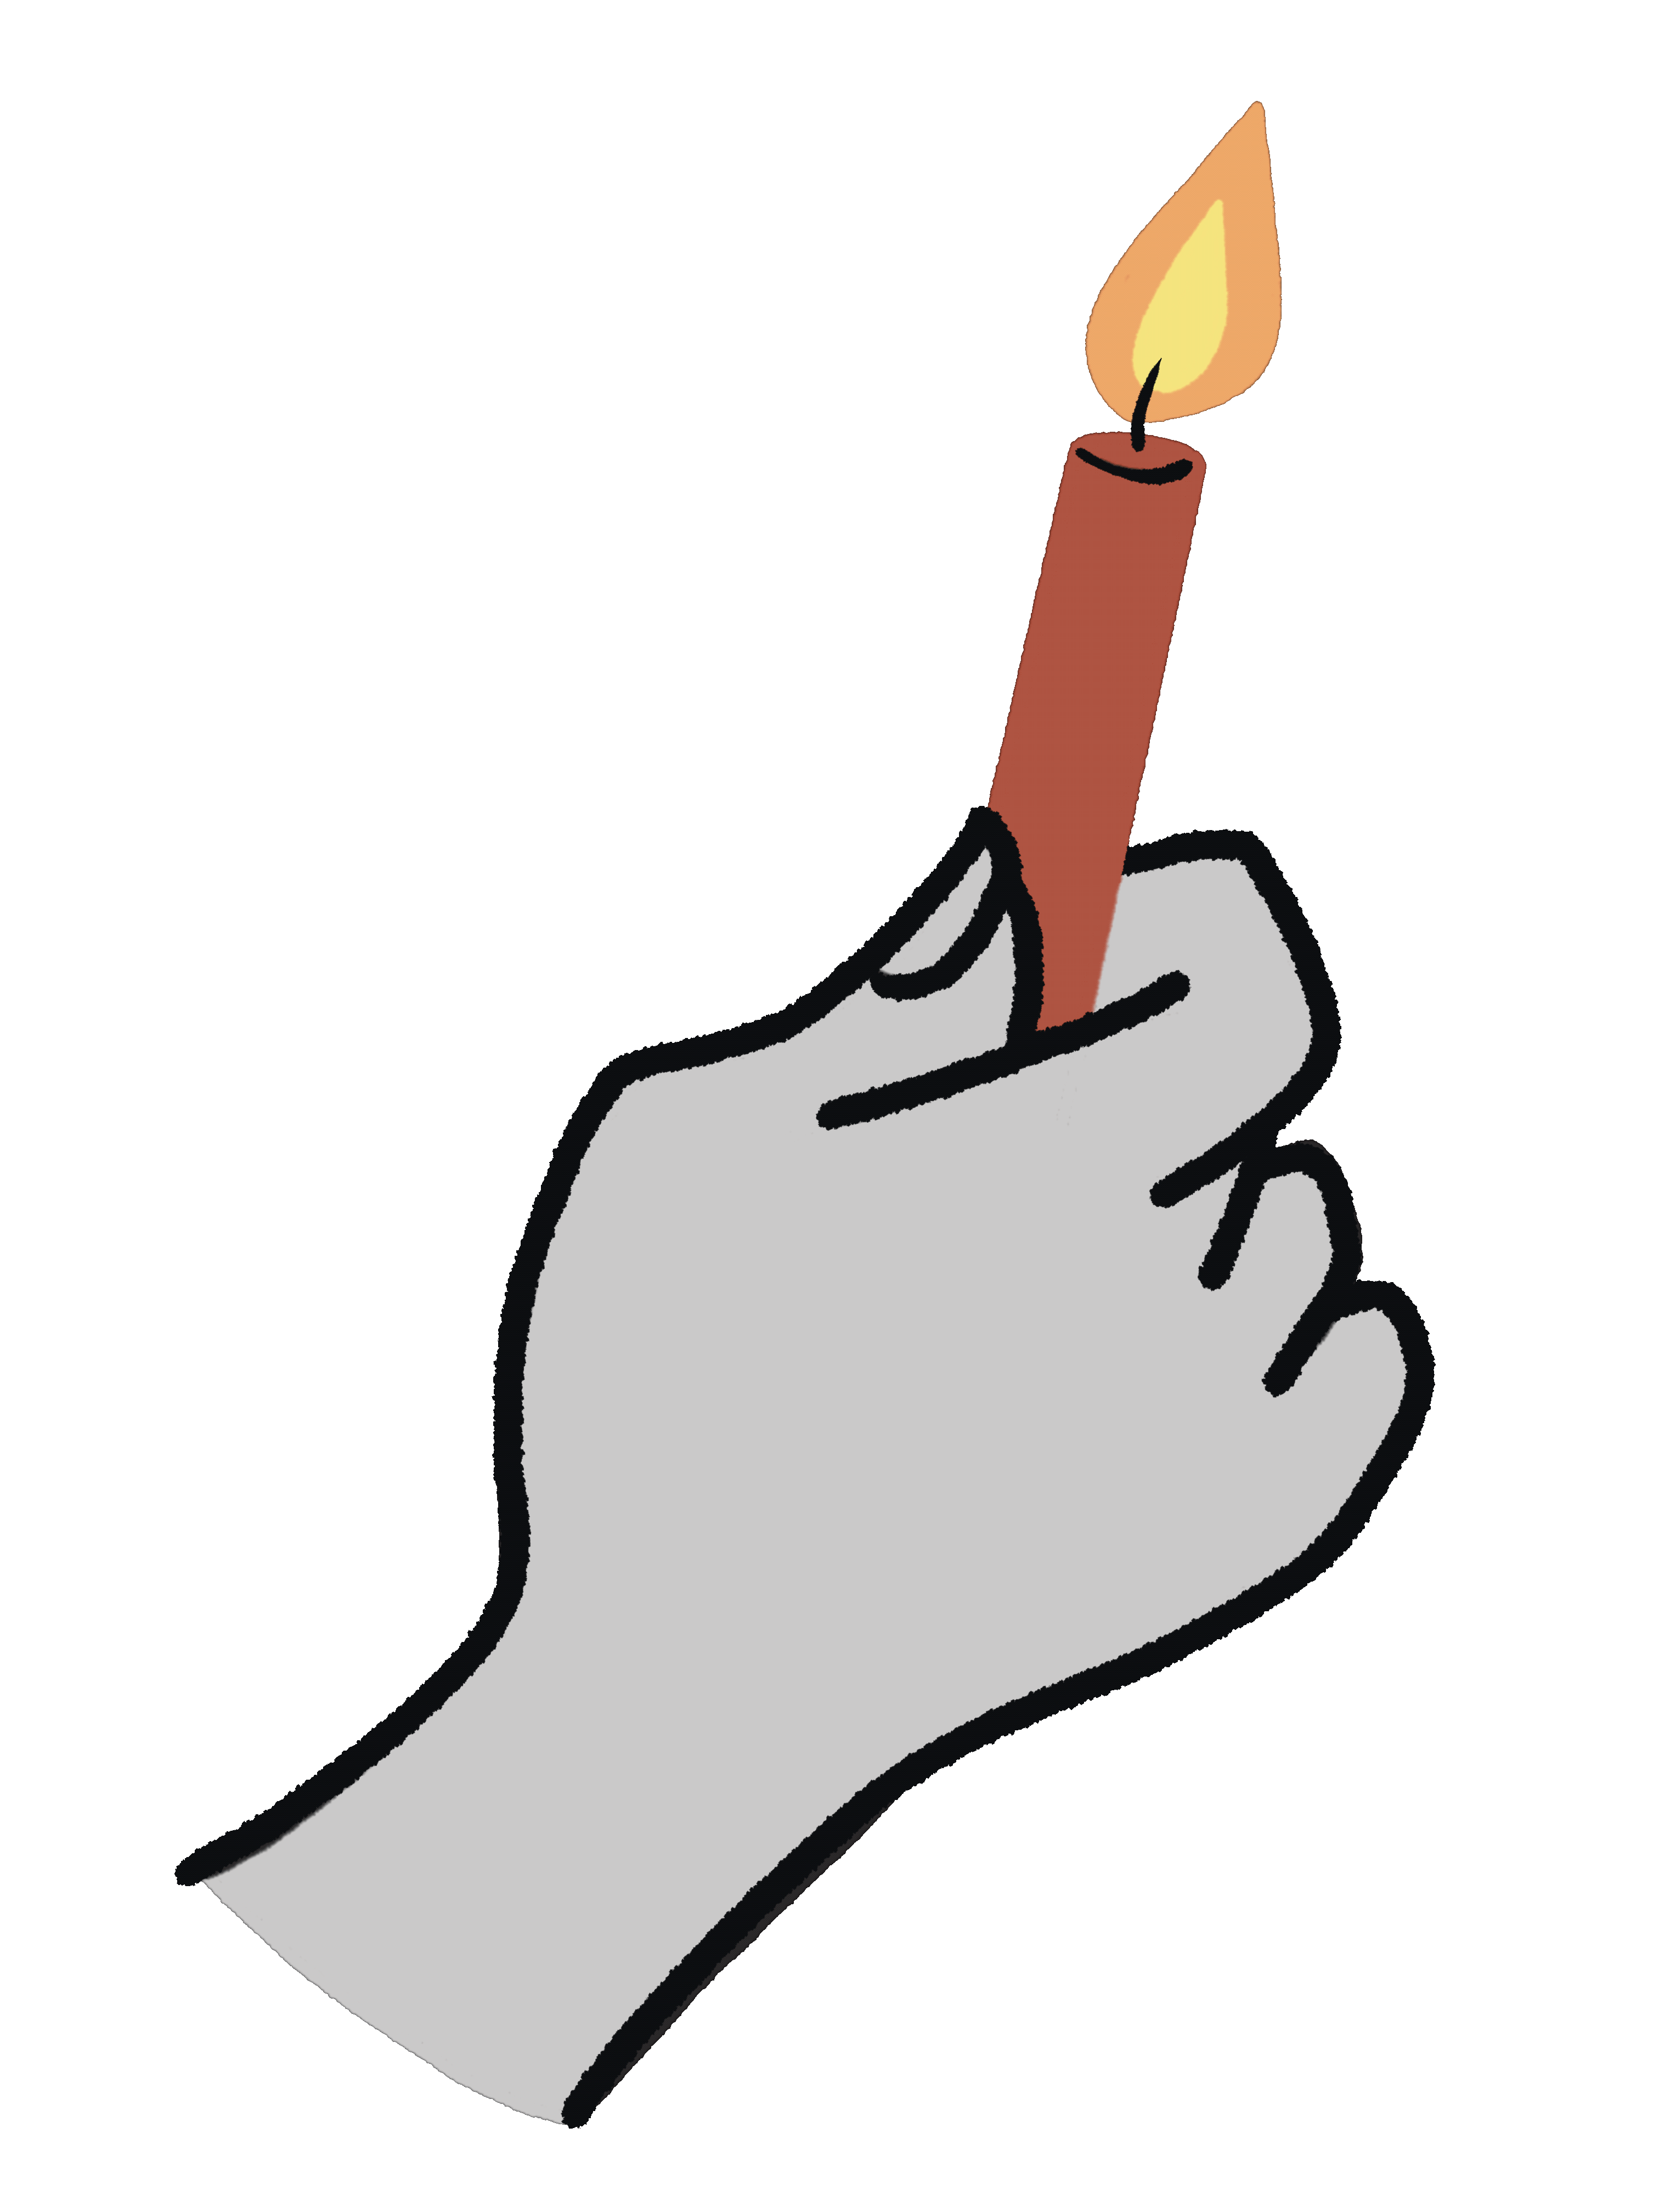 Hand holding candle with animated flame blowing in the wind